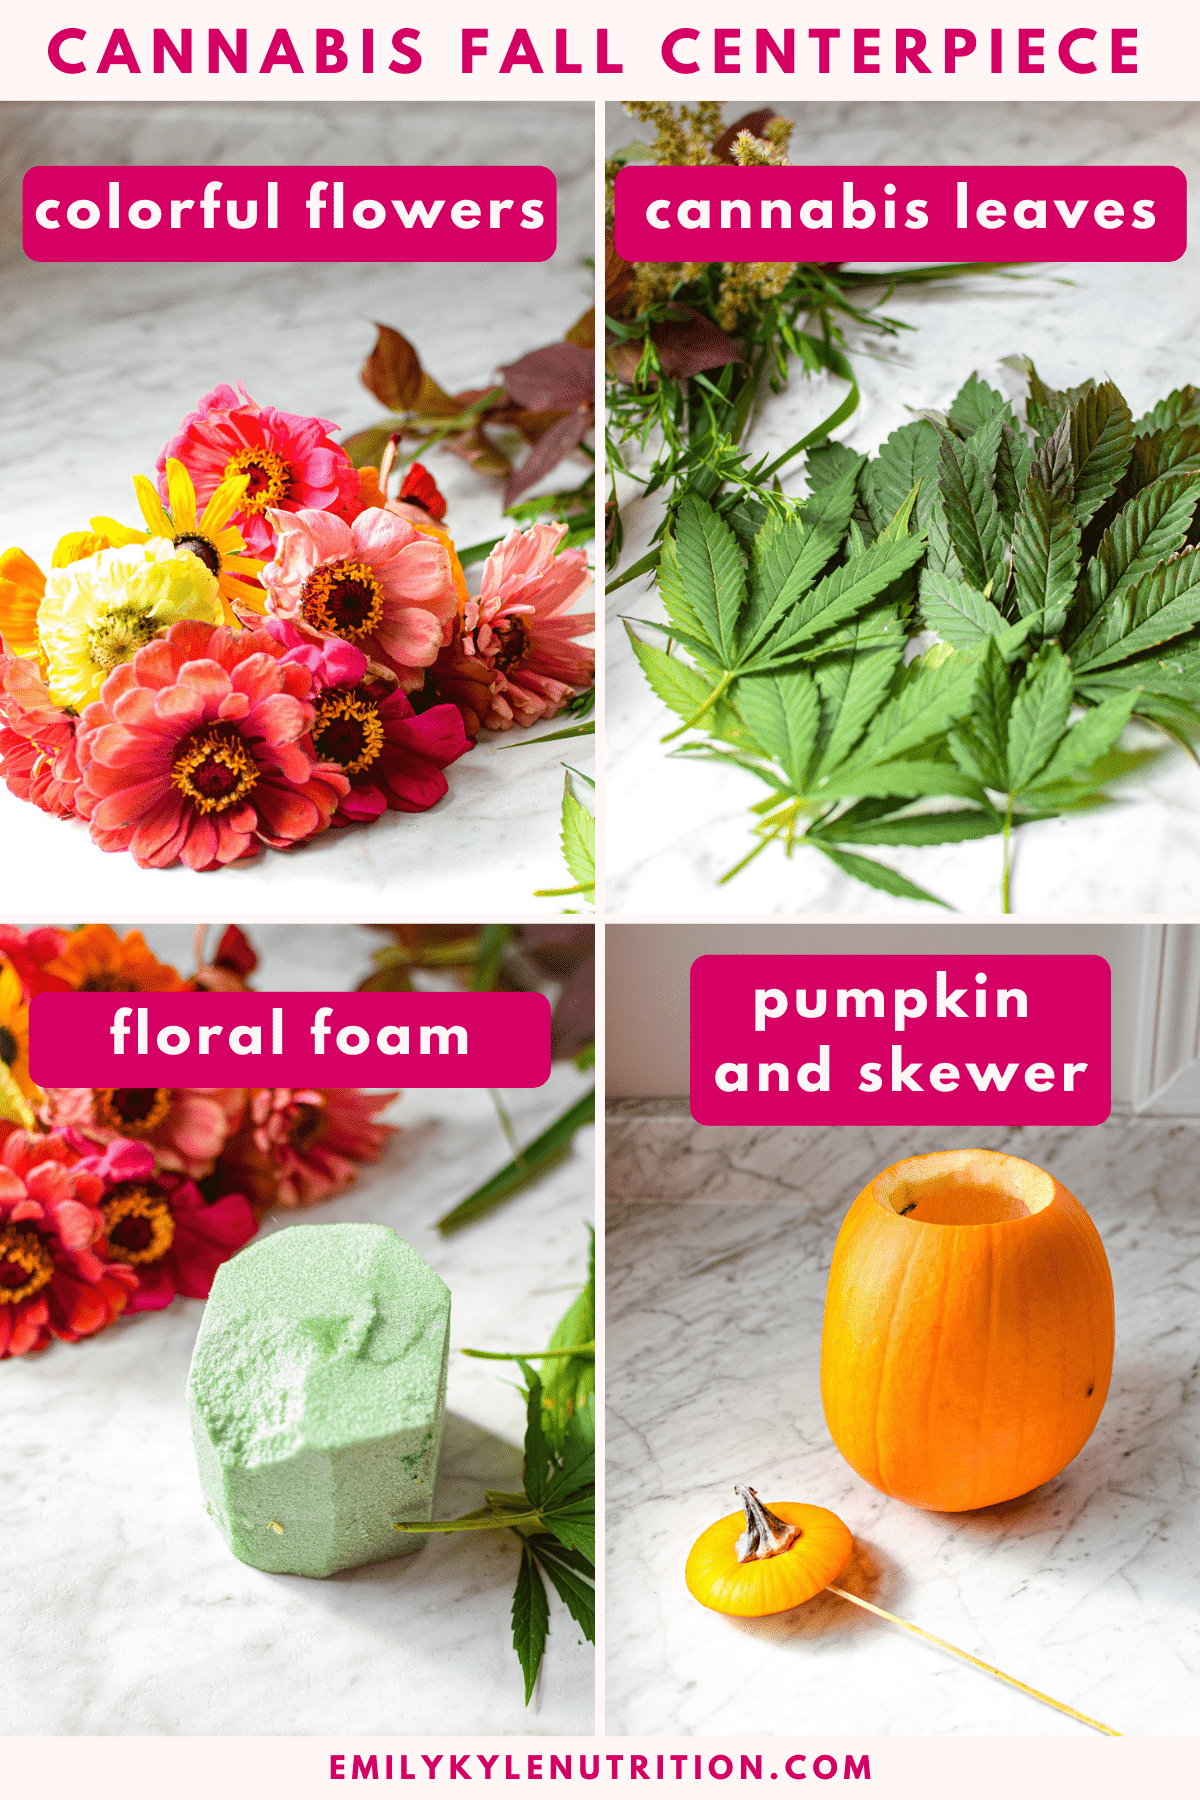 A four image collage showing the items needed to make a cannabis fall centerpiece including colorful flowers, cannabis leaves, floral foam, and a pumpkin with a skewer